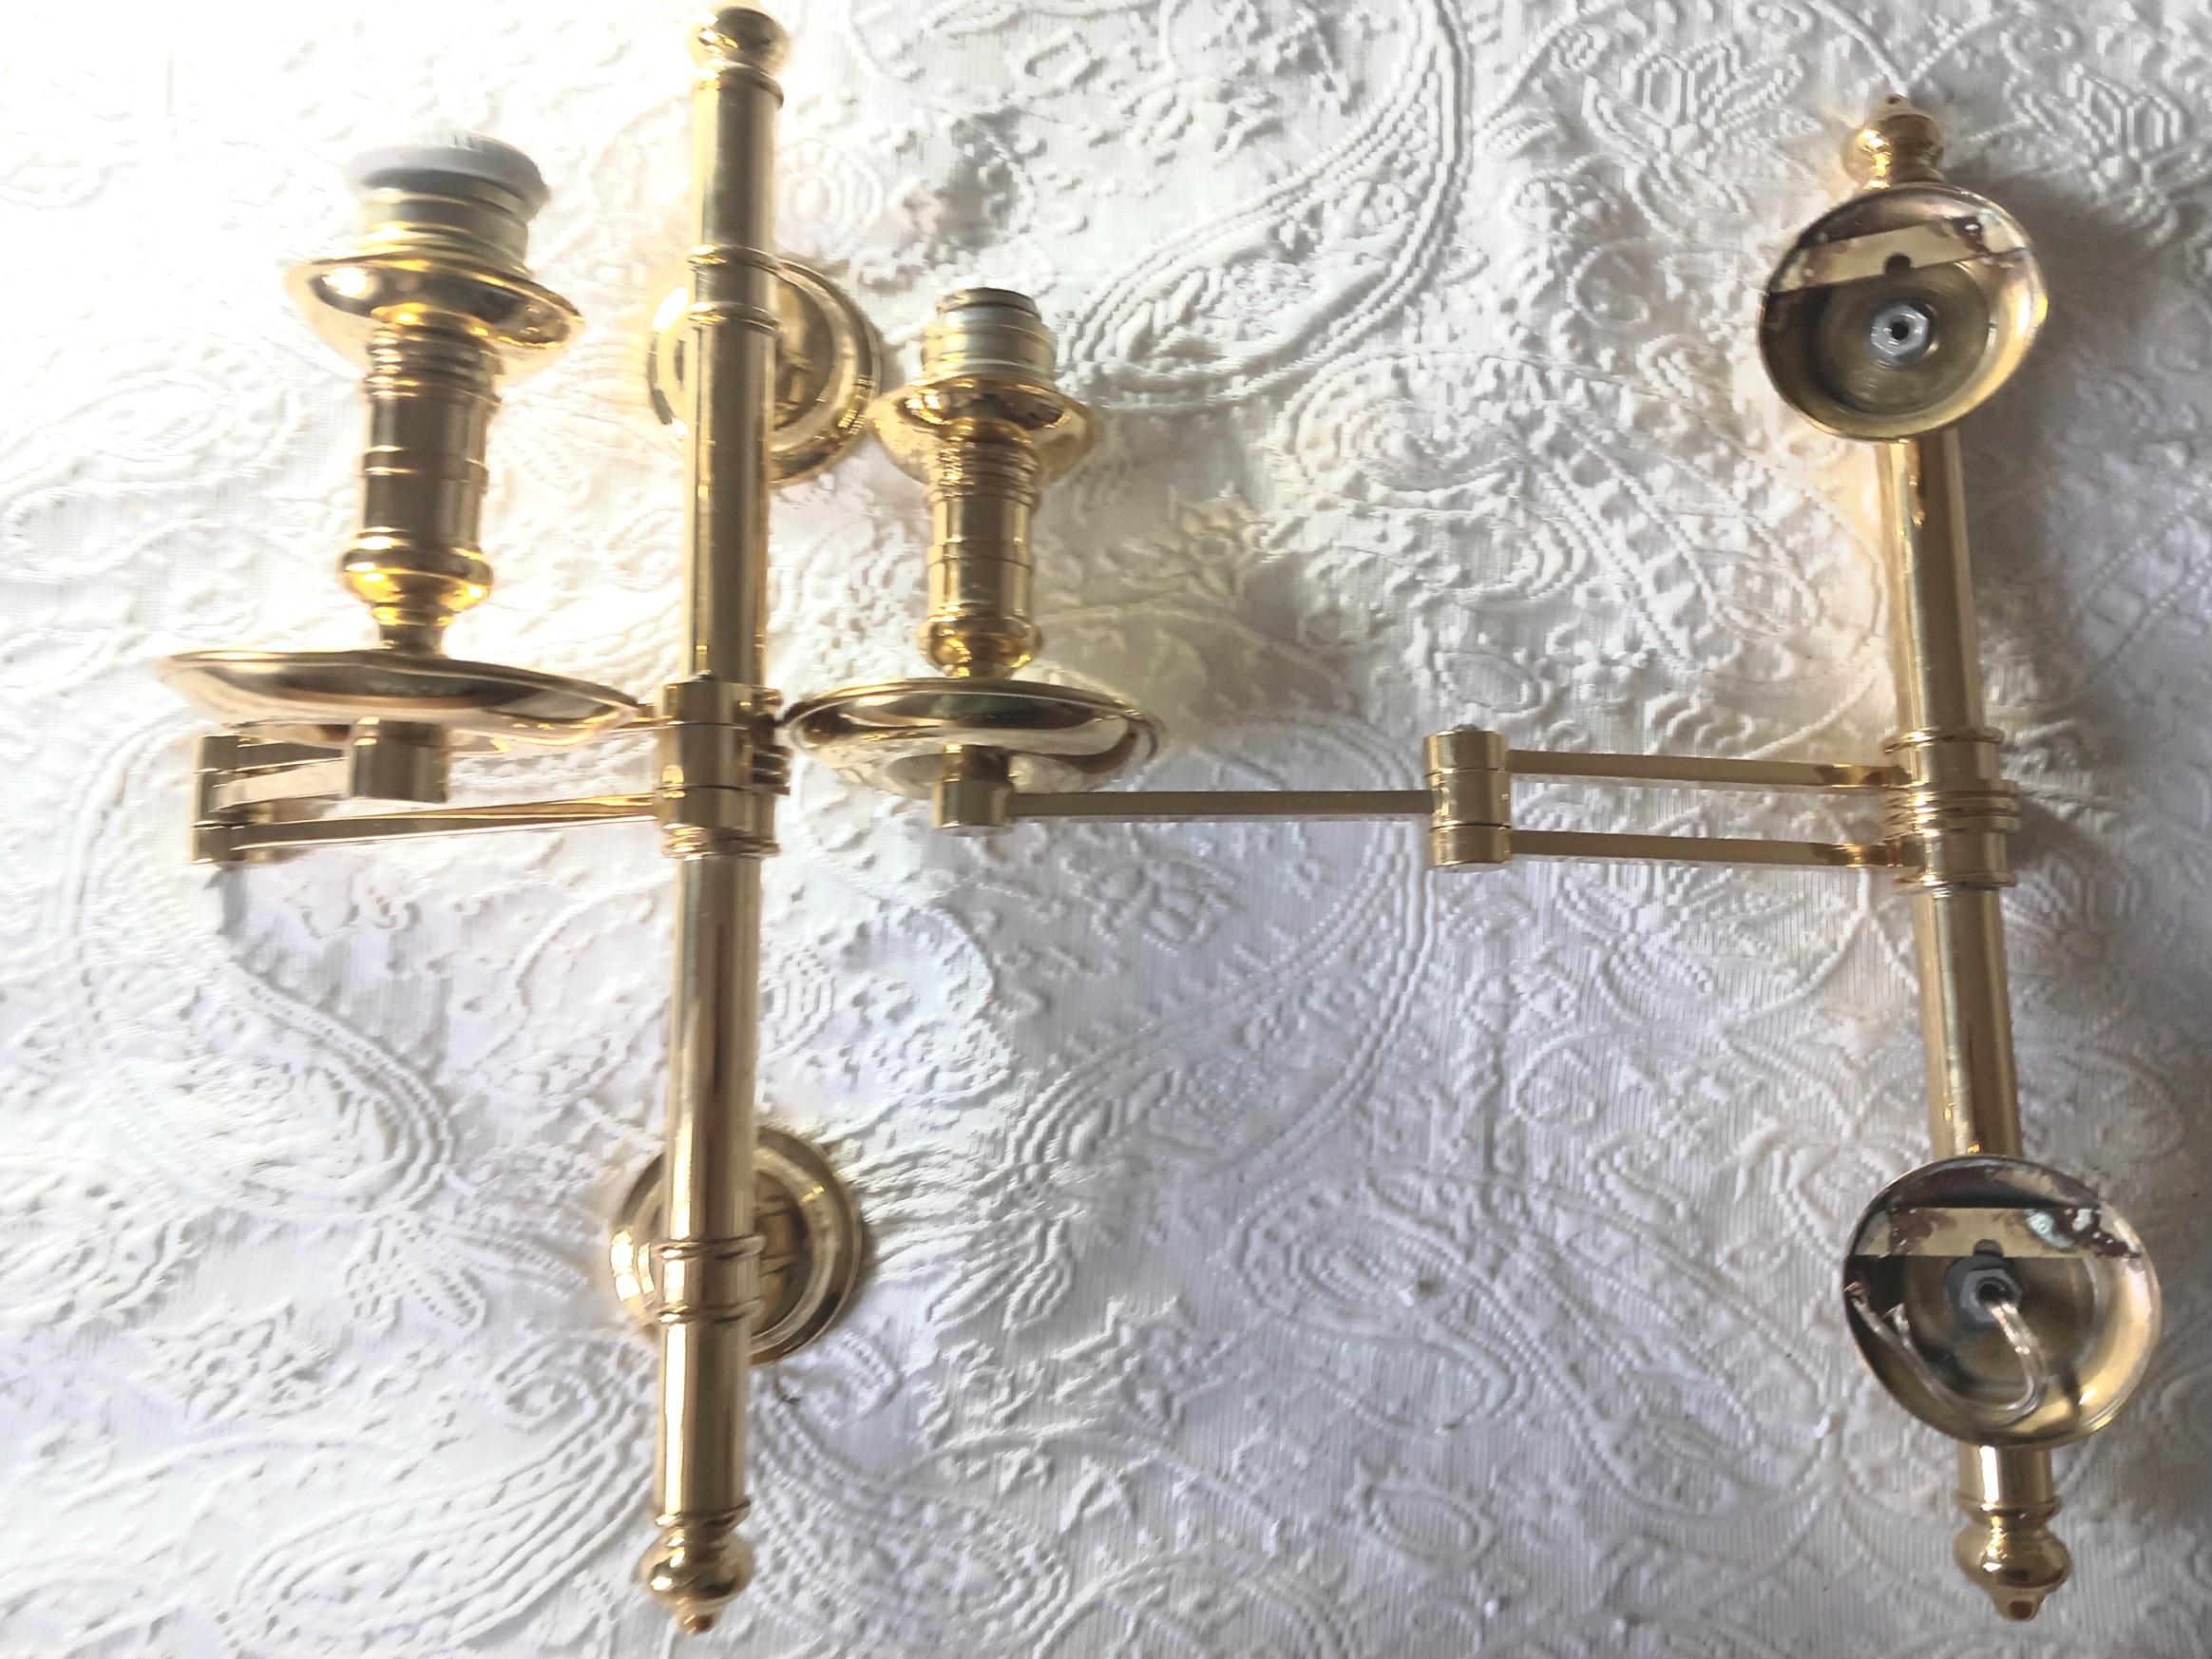  Pair of French Mison Jansen Swing Arm Sconces For Sale 10